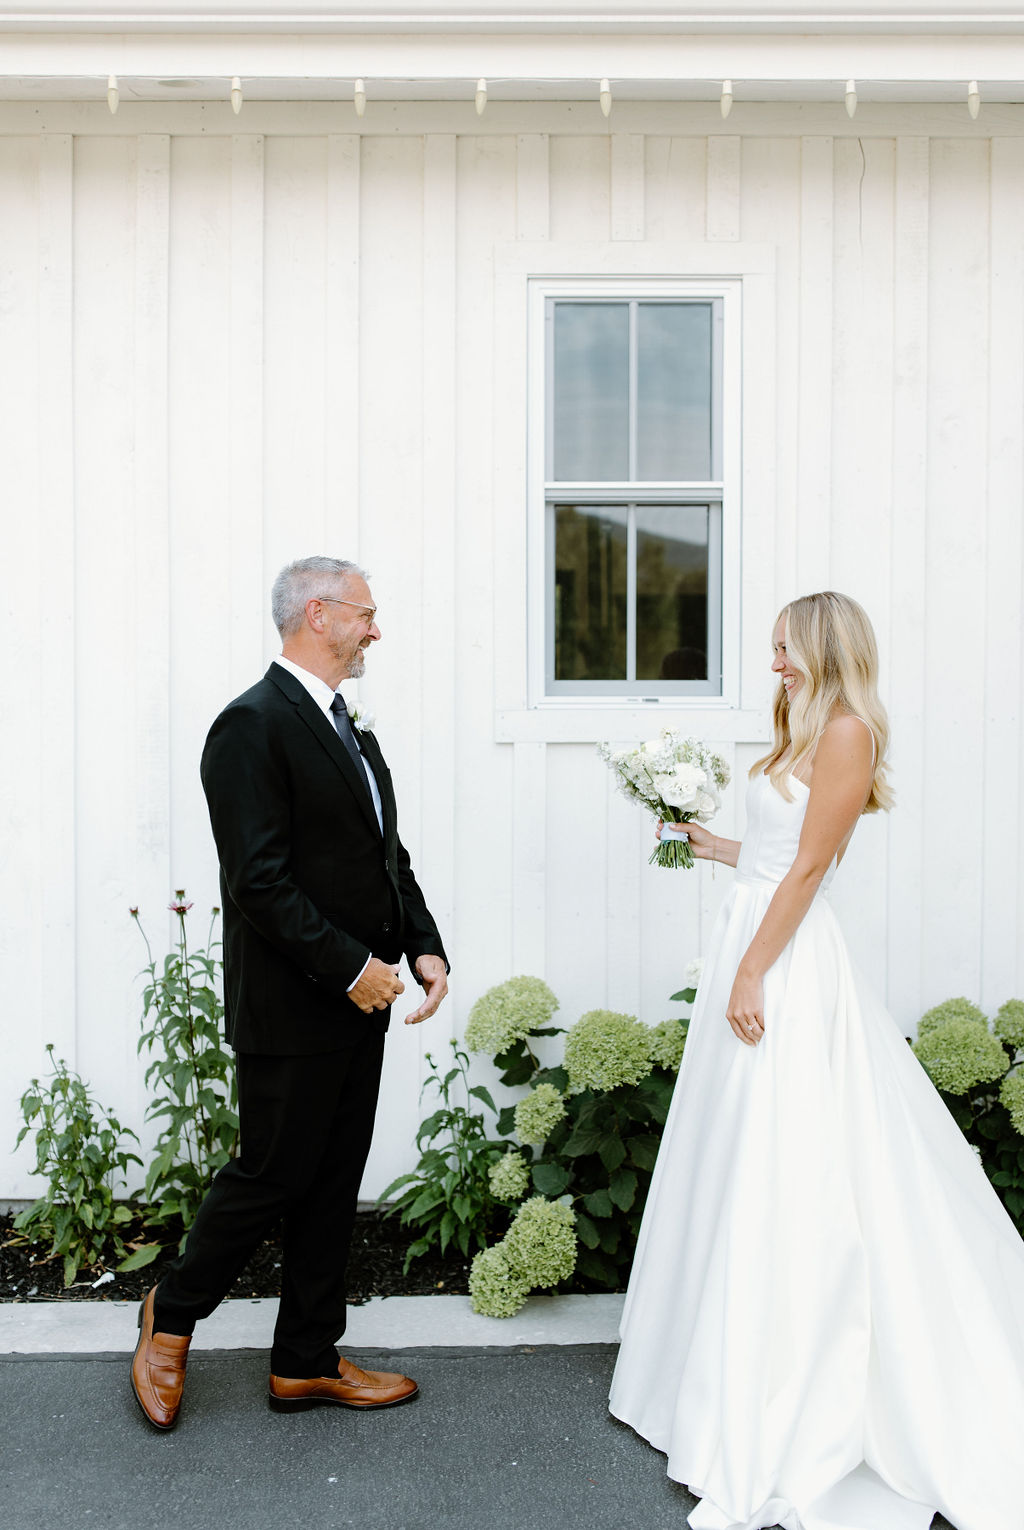 dad and daughter wedding photo ideas